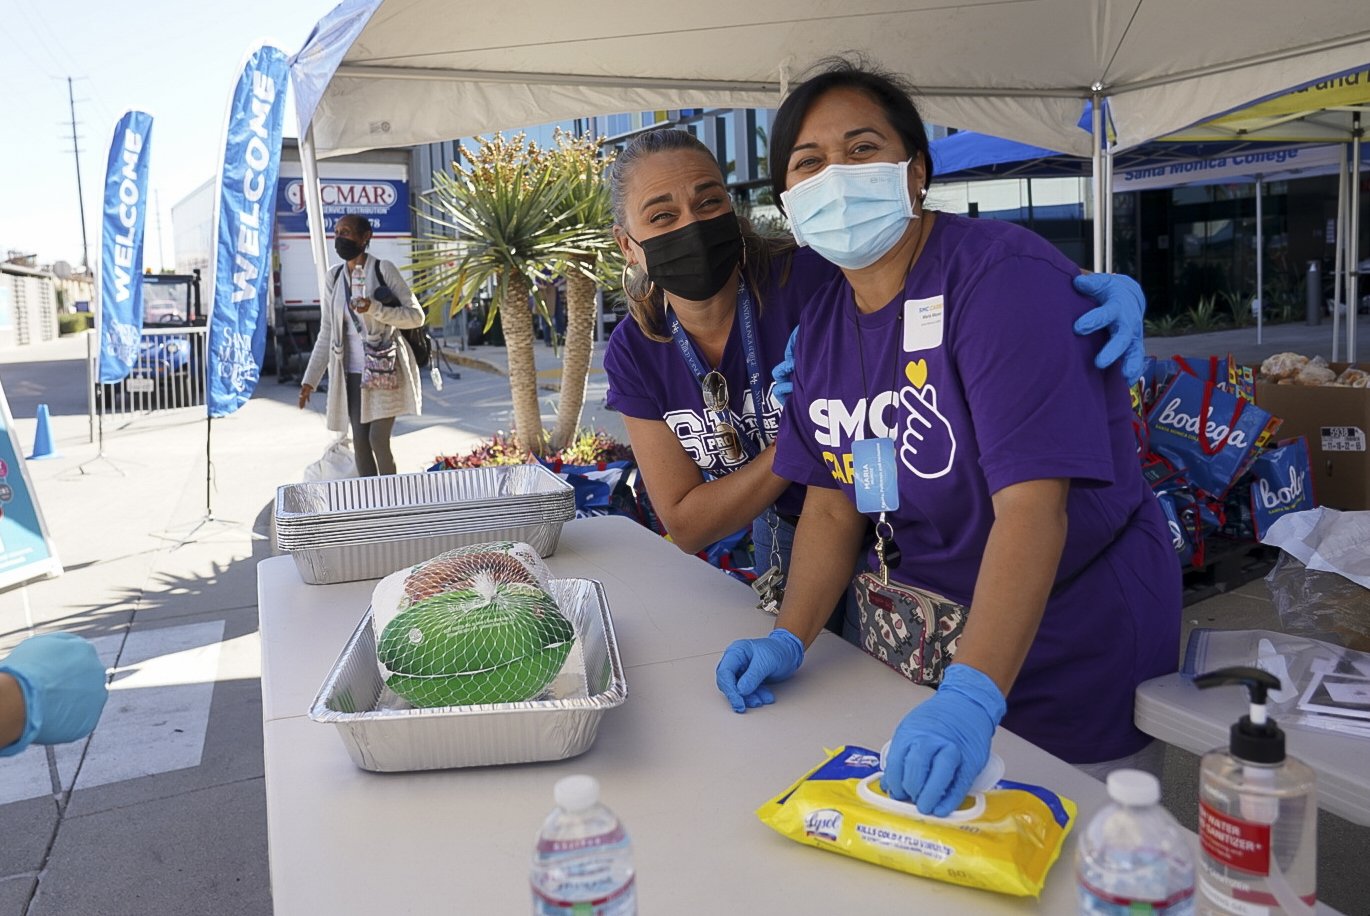  Volunteers pose for a photo during Santa Monica College's 3rd Giving Thanks(Giving) charity food distribution event Tuesday, Nov. 22 2022. The drive-thru market featured free care packages designed to ease the burden faced by food-insecure students.